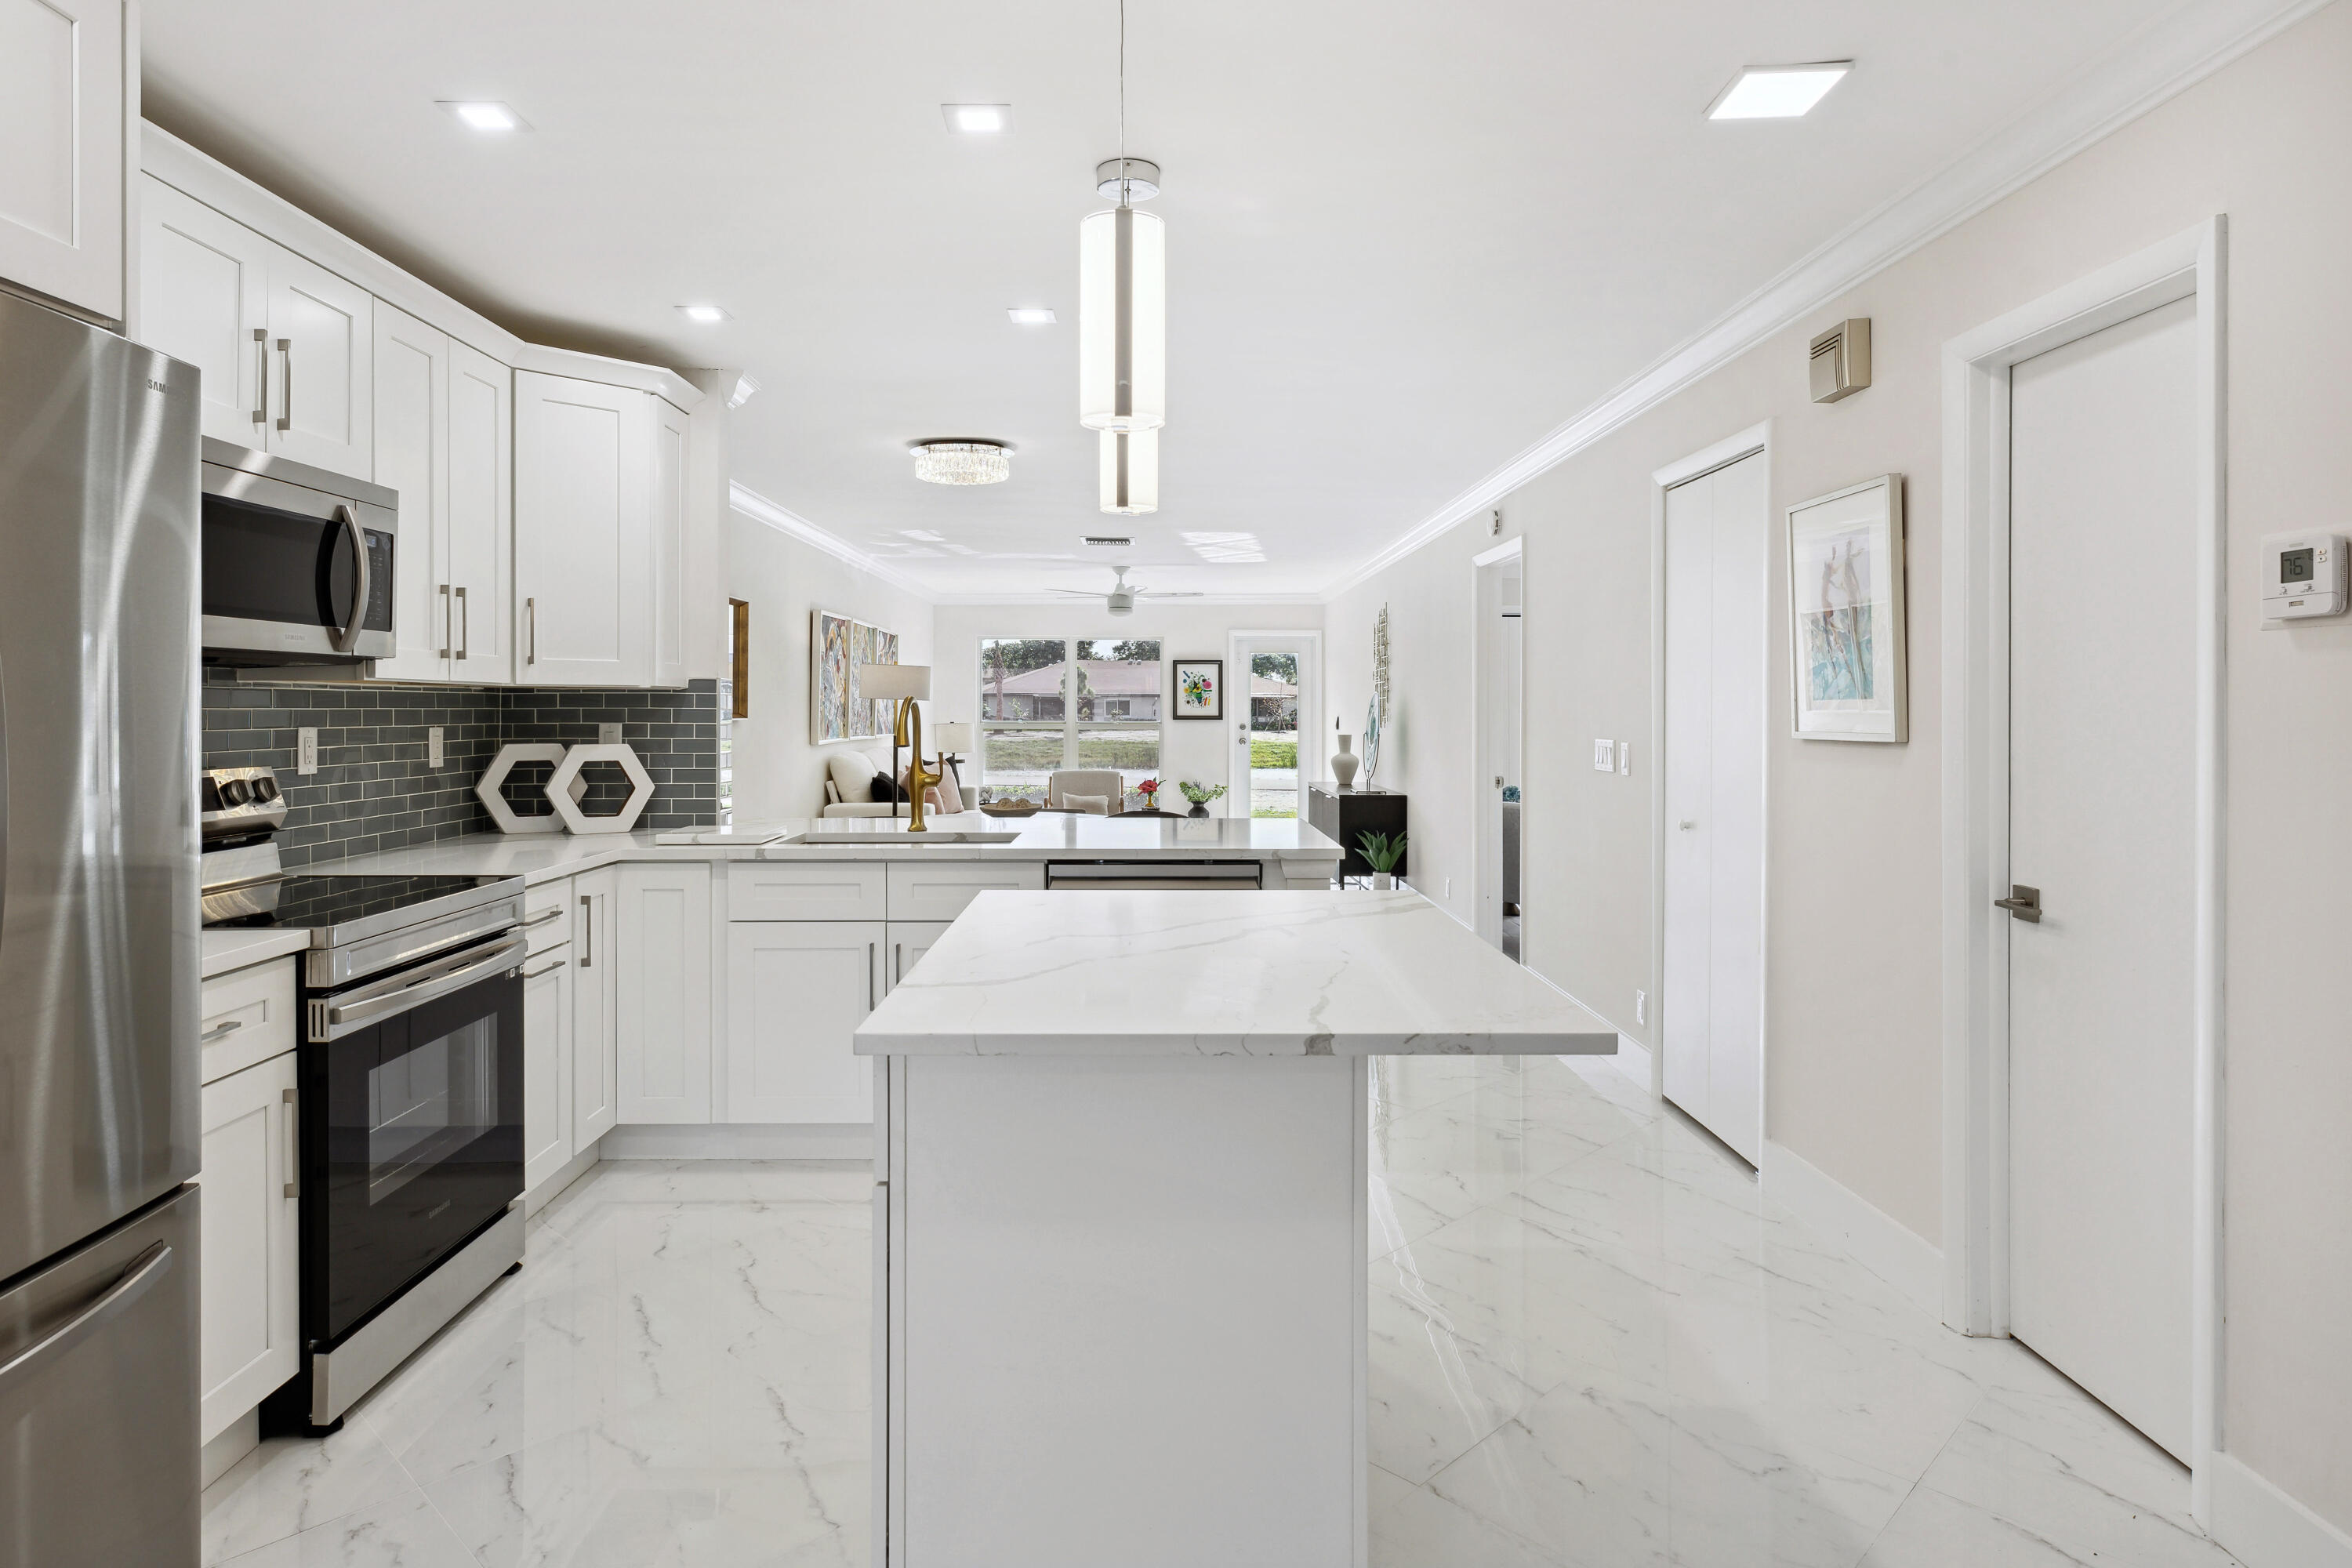 a kitchen with stainless steel appliances kitchen island granite countertop a refrigerator oven a sink dishwasher and white cabinets with wooden floor